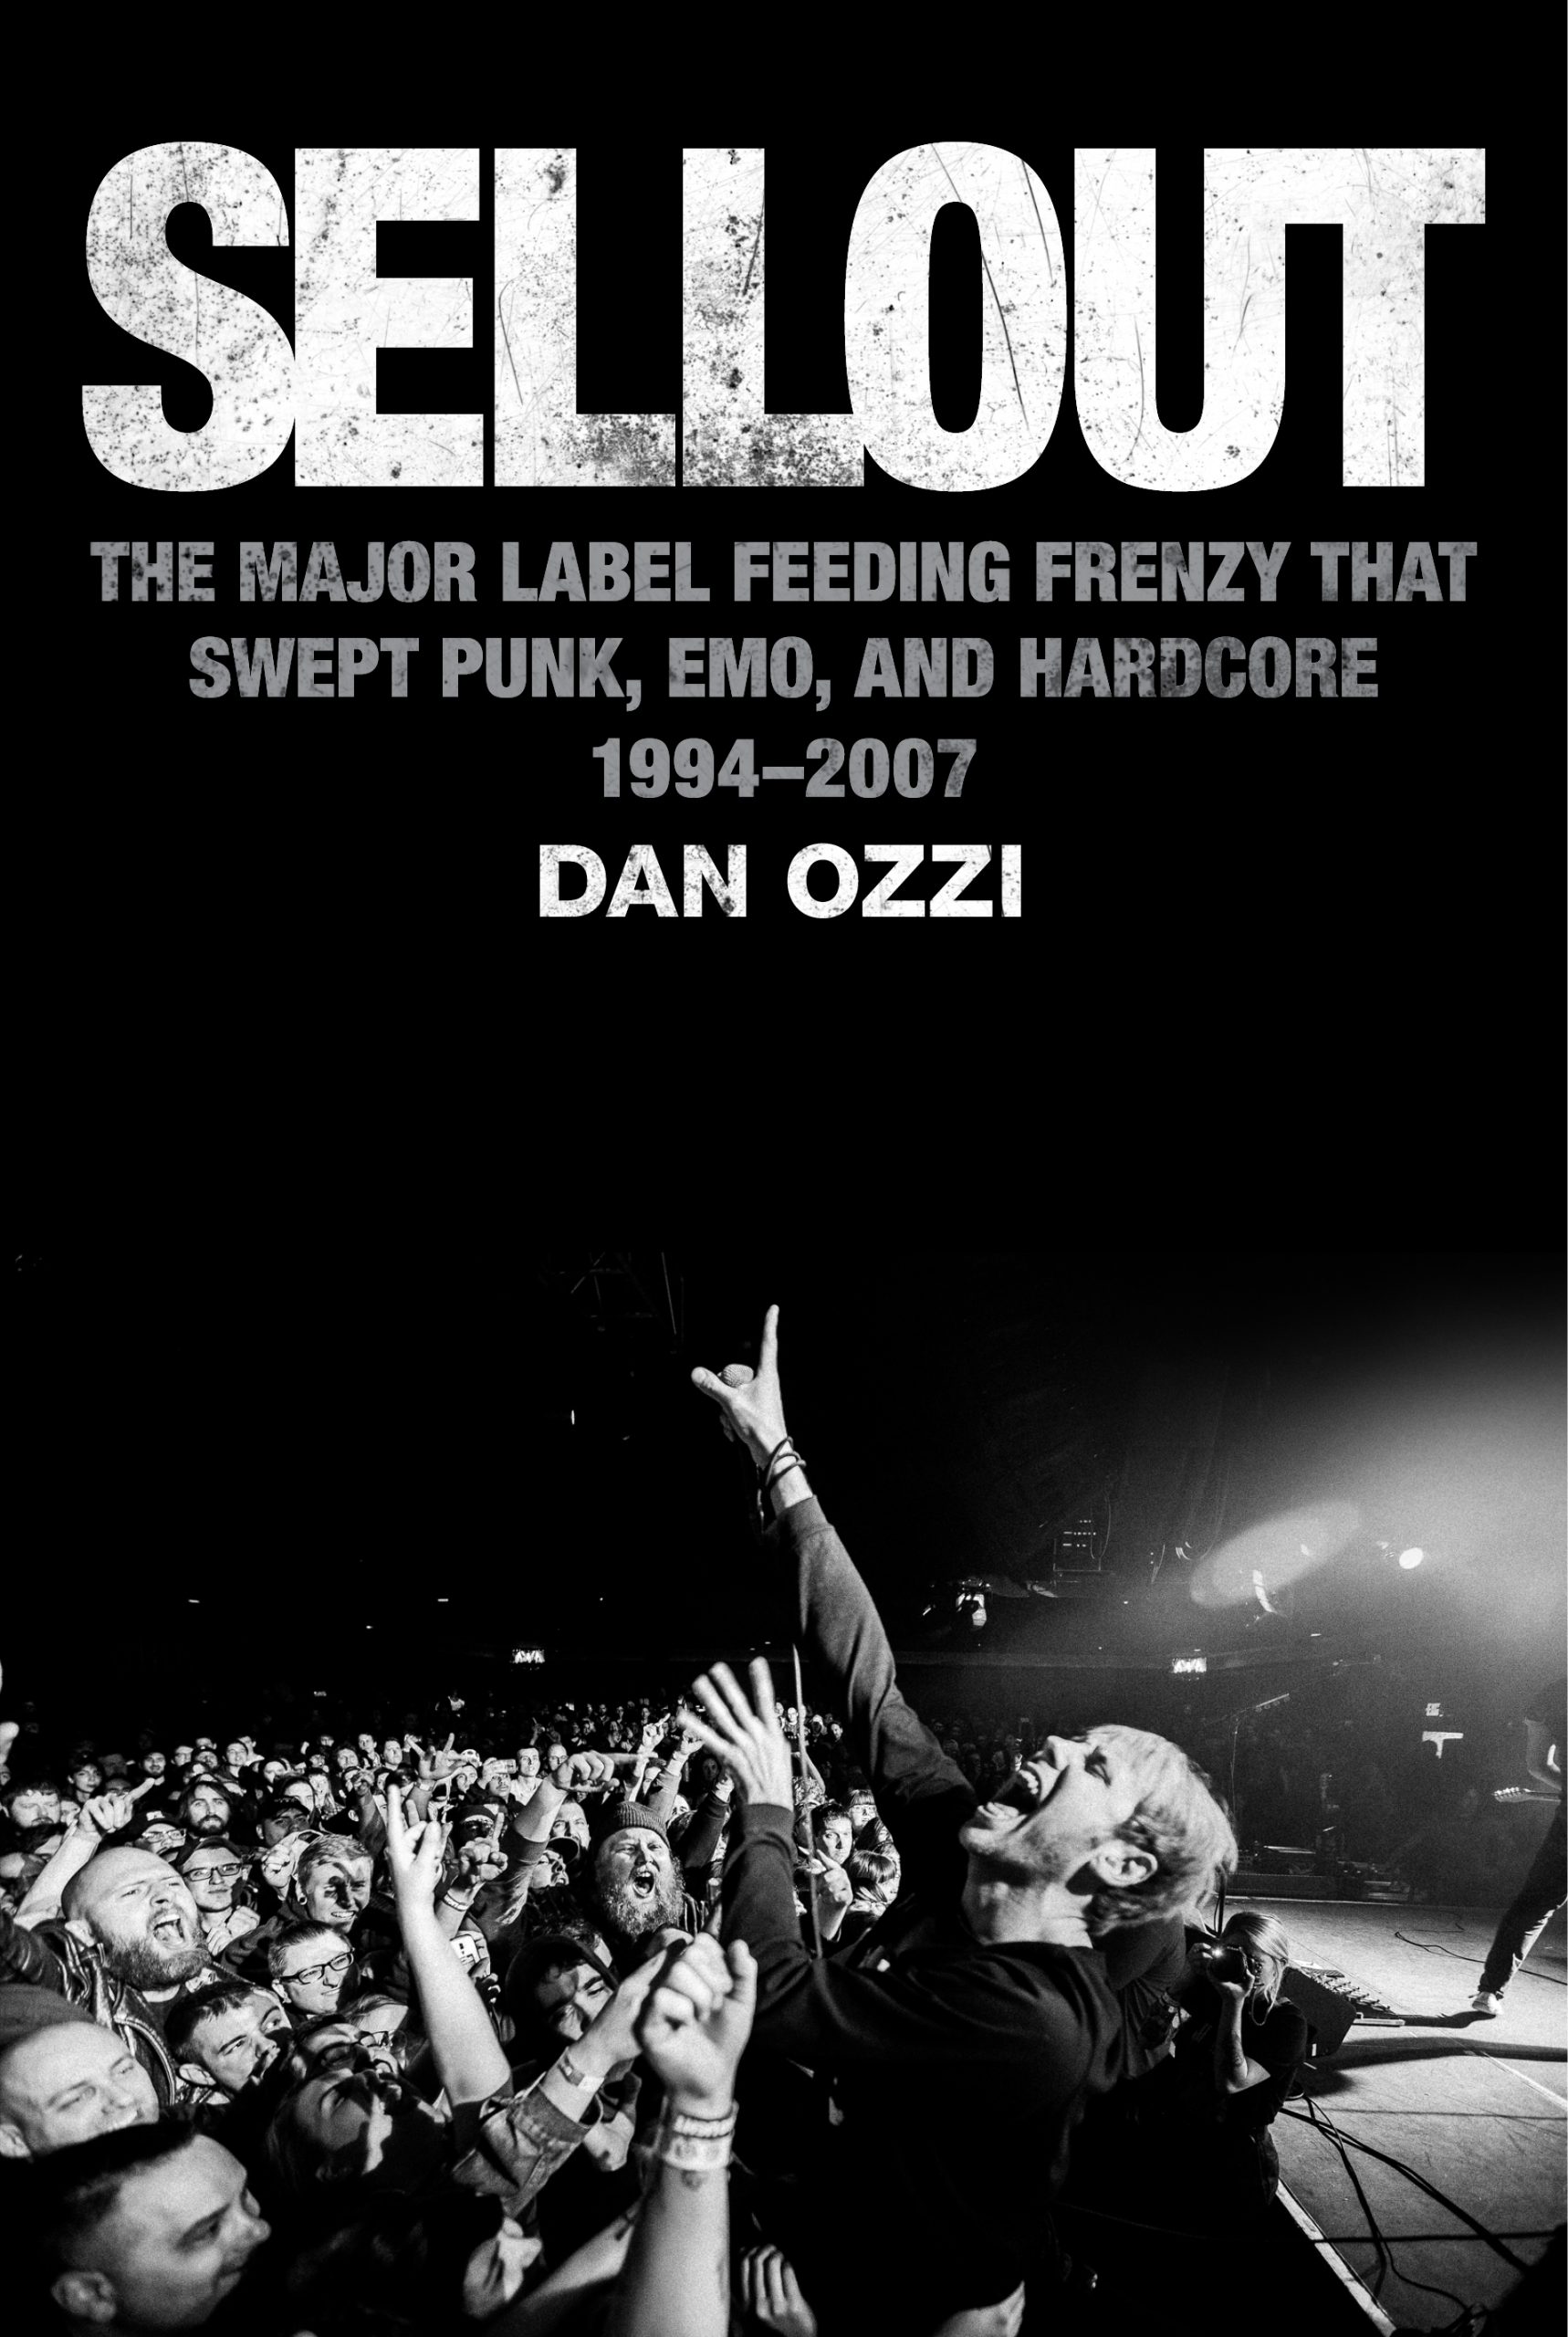 'Sellout: The Major Label Feeding Frenzy that Swept Punk, Emo, and Hardcore' by Dan Ozzi